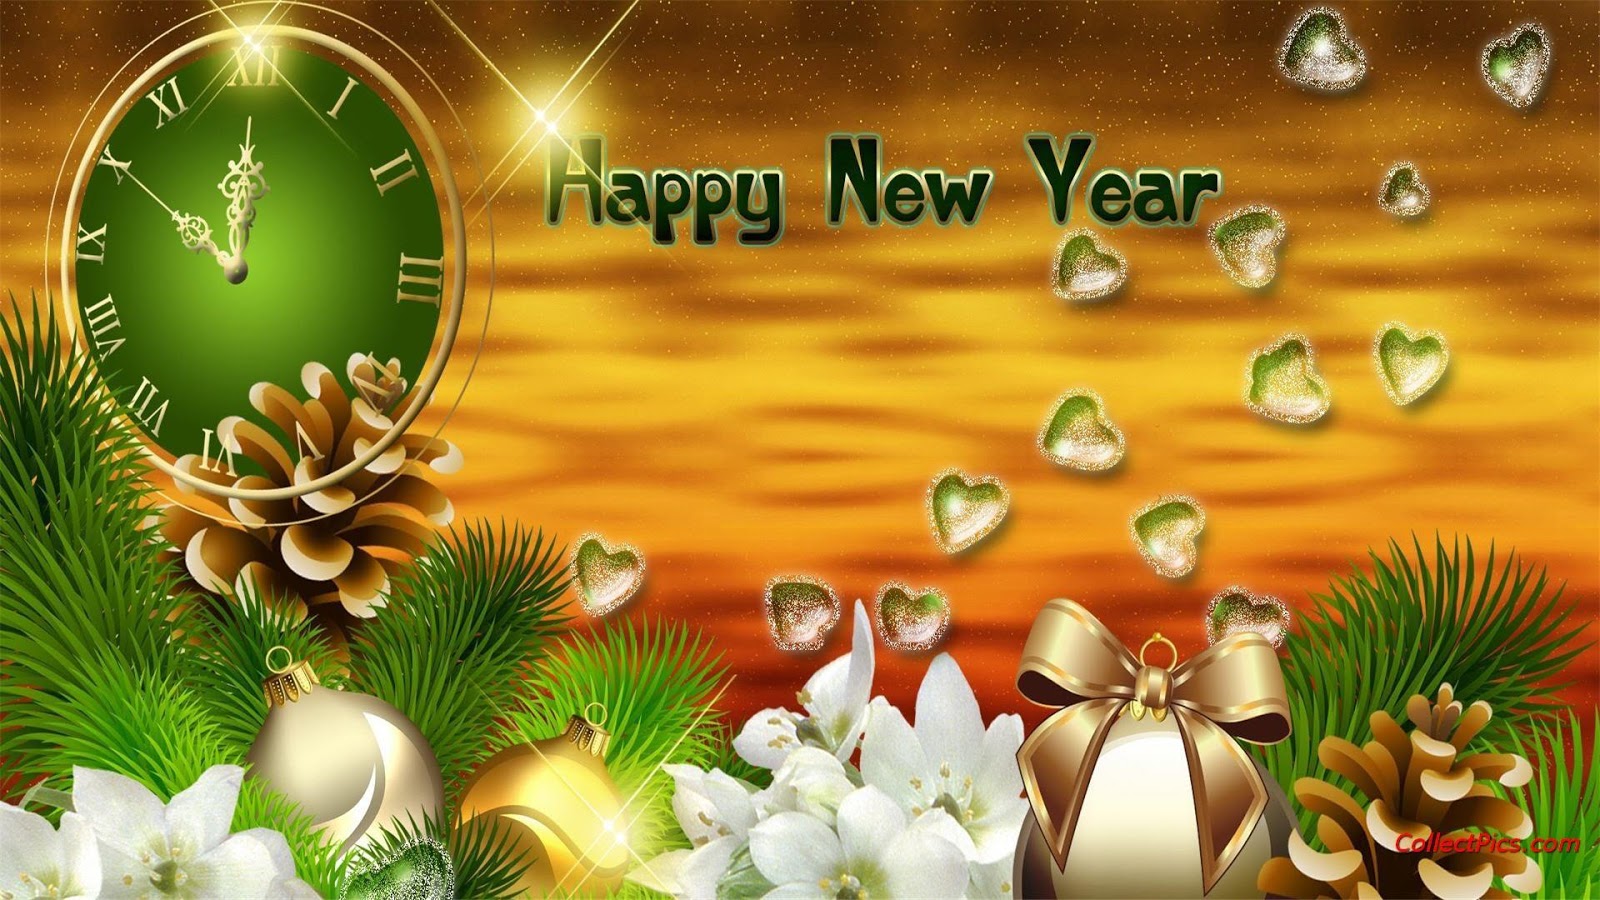 Happy New Year Wallpapers 2016 Free Download Images Shine